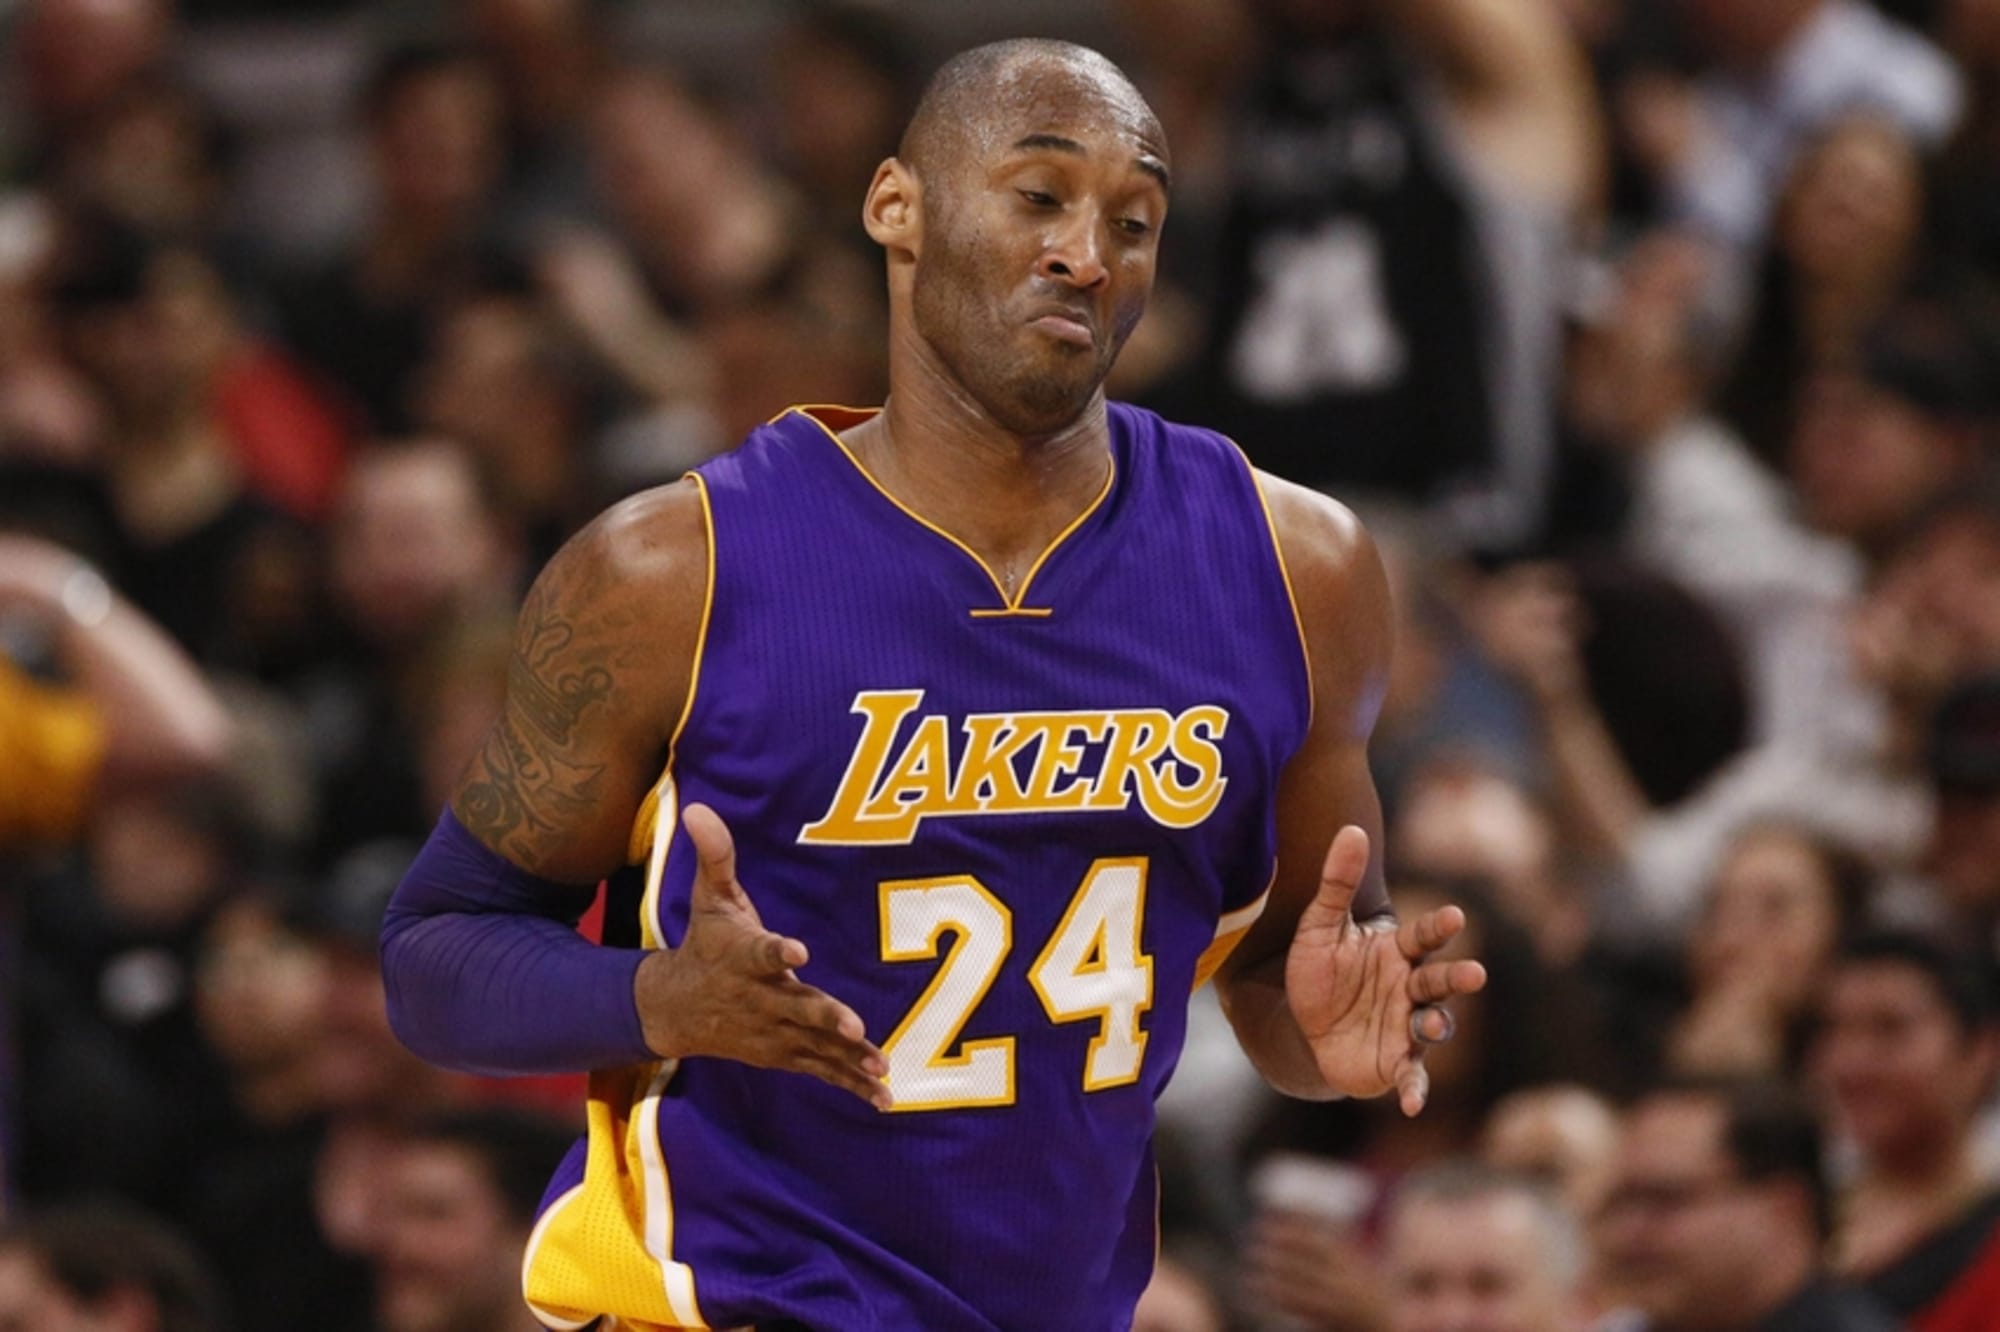 NBA 75th anniversary: Kobe Bryant does not make list of top 10 players